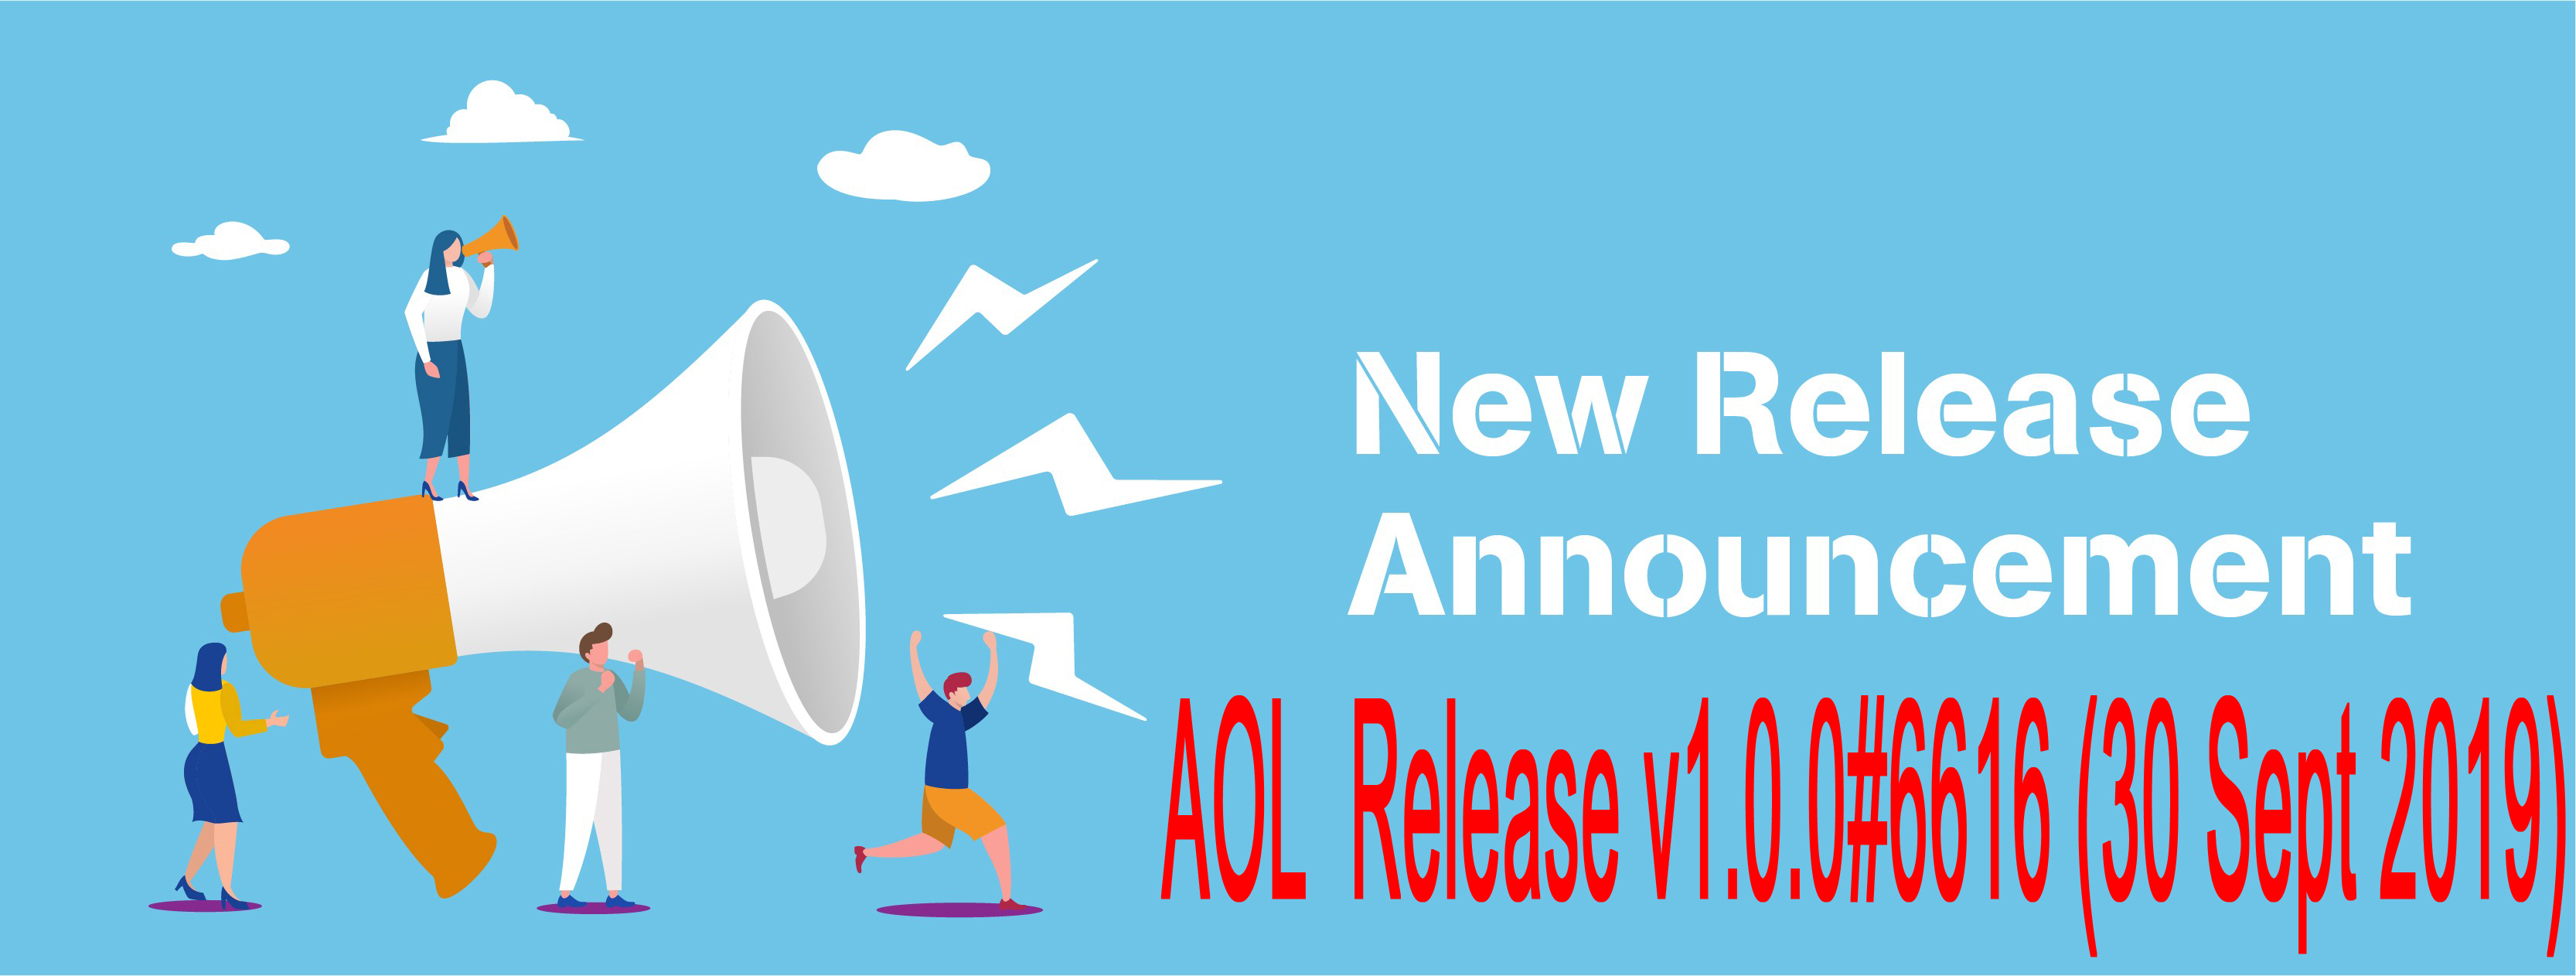 Accurate Online Release v1.0.0#6616 (30 Sept 2019)